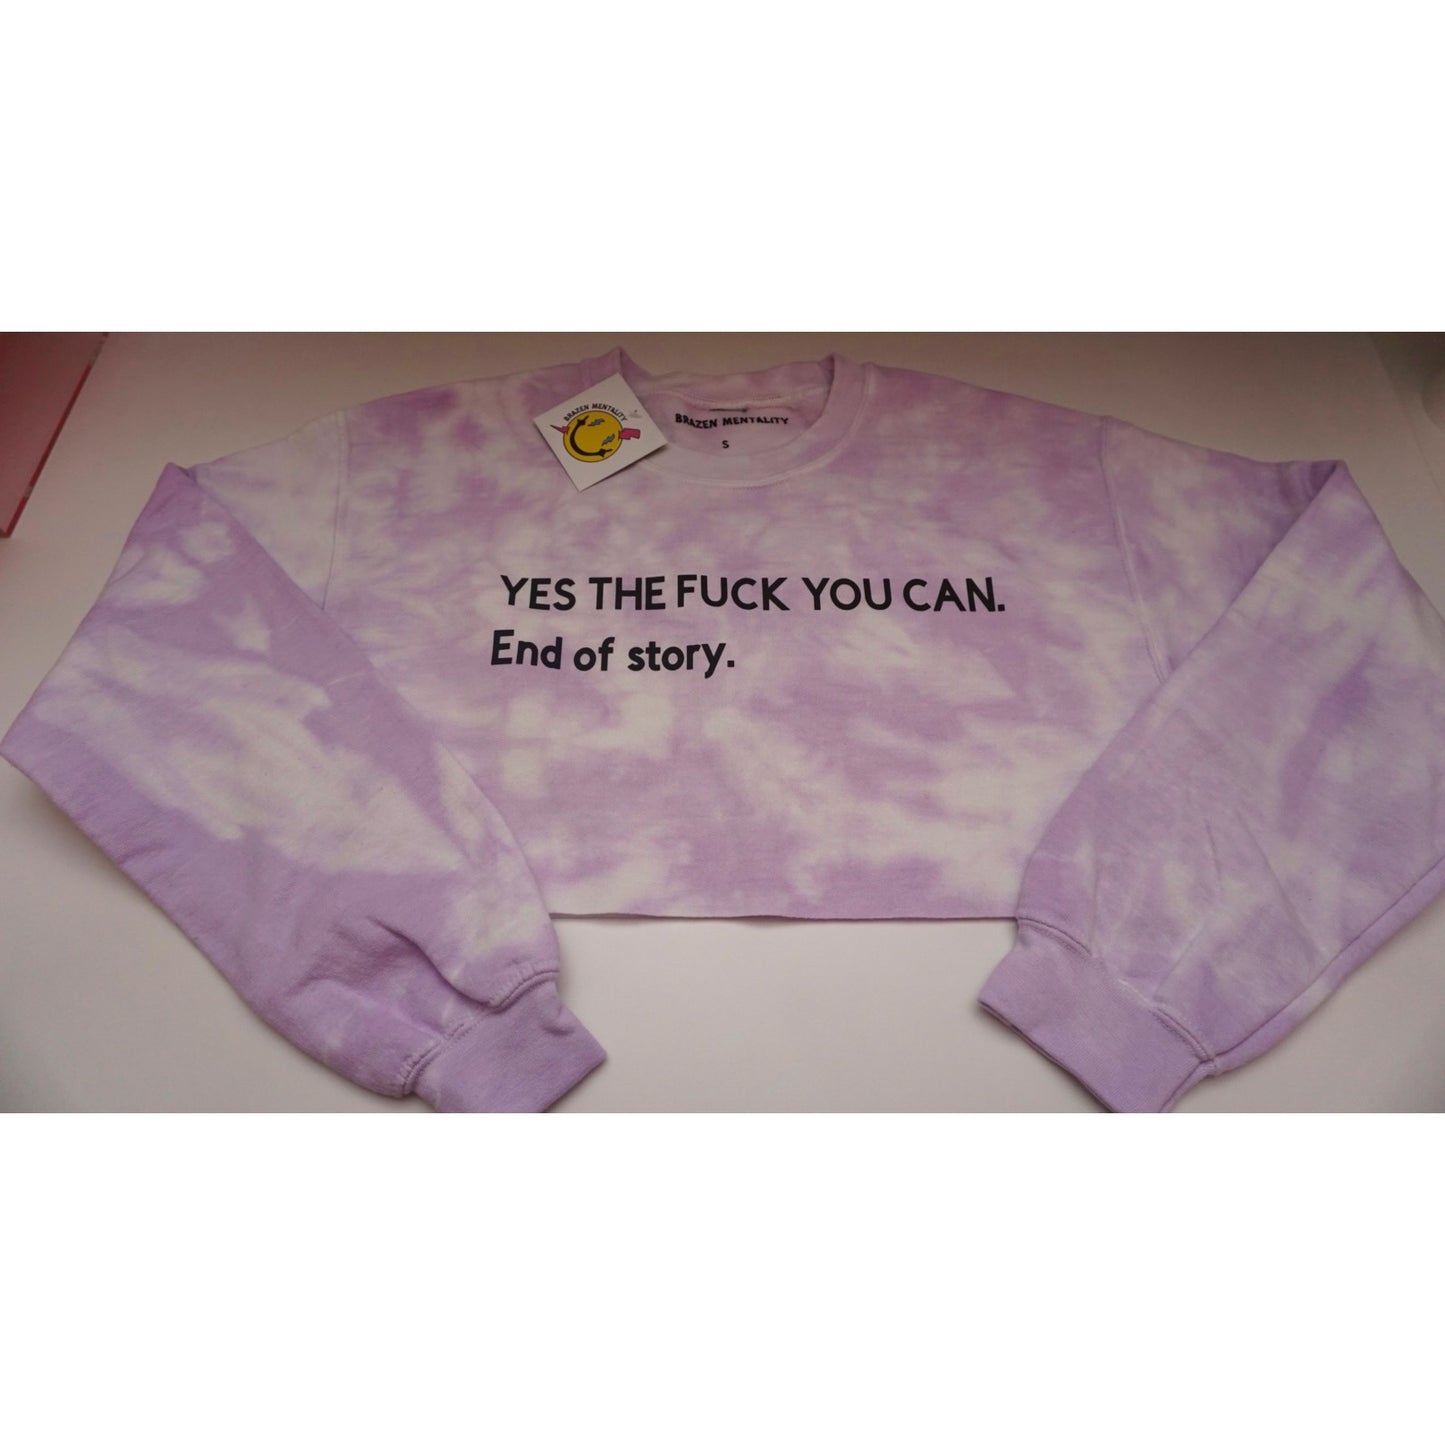 YES THE FUCK YOU CAN.End of story,(tie dye sweatshirt)